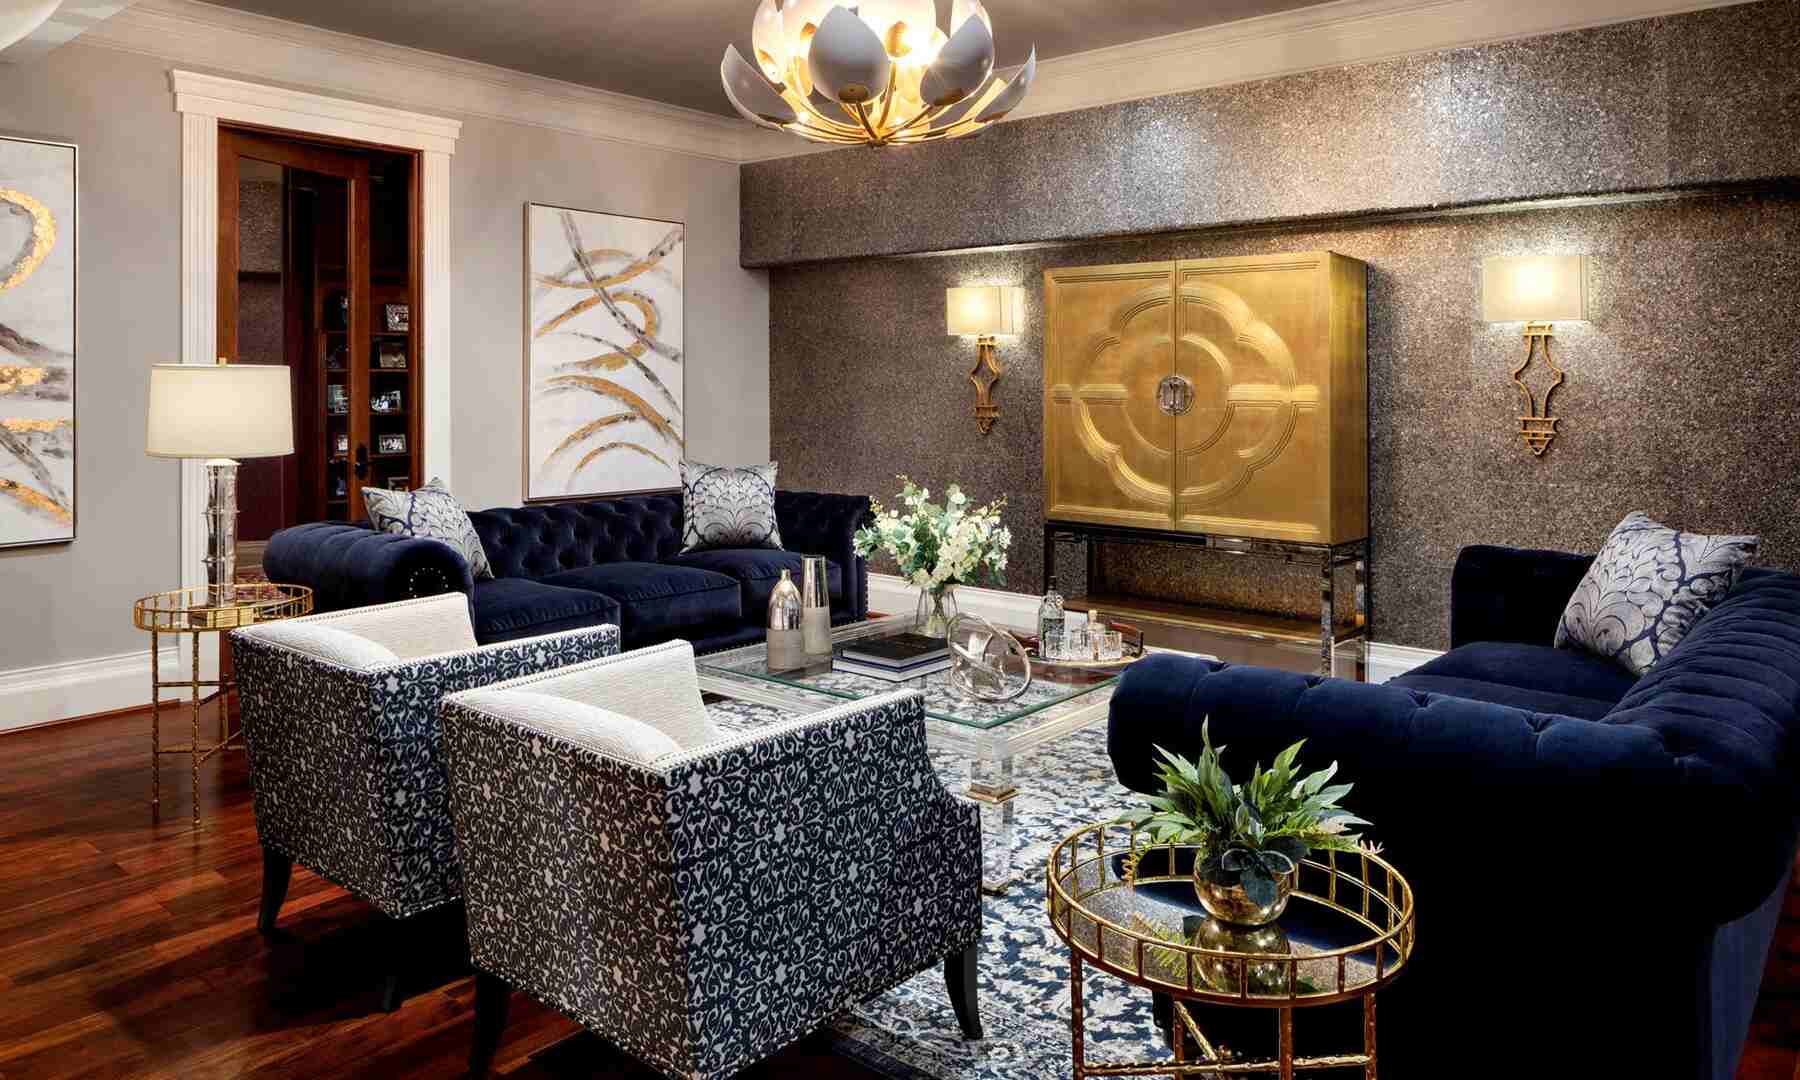 Living room with blue tufted sofas and two armchairs with aesthetic hanging light fixture